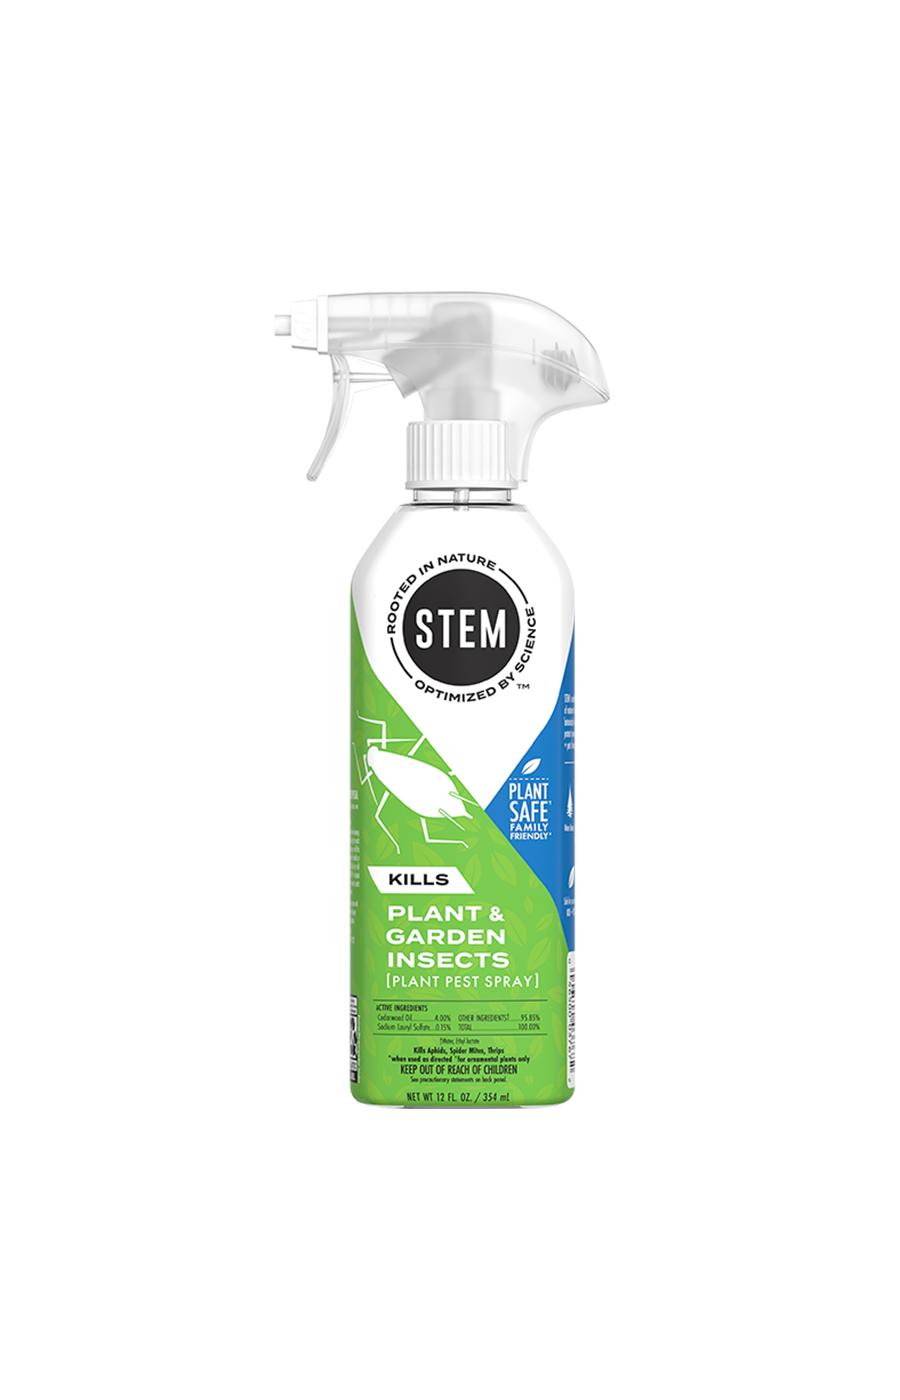 STEM Plant & Garden Insects Pest Spray; image 1 of 4